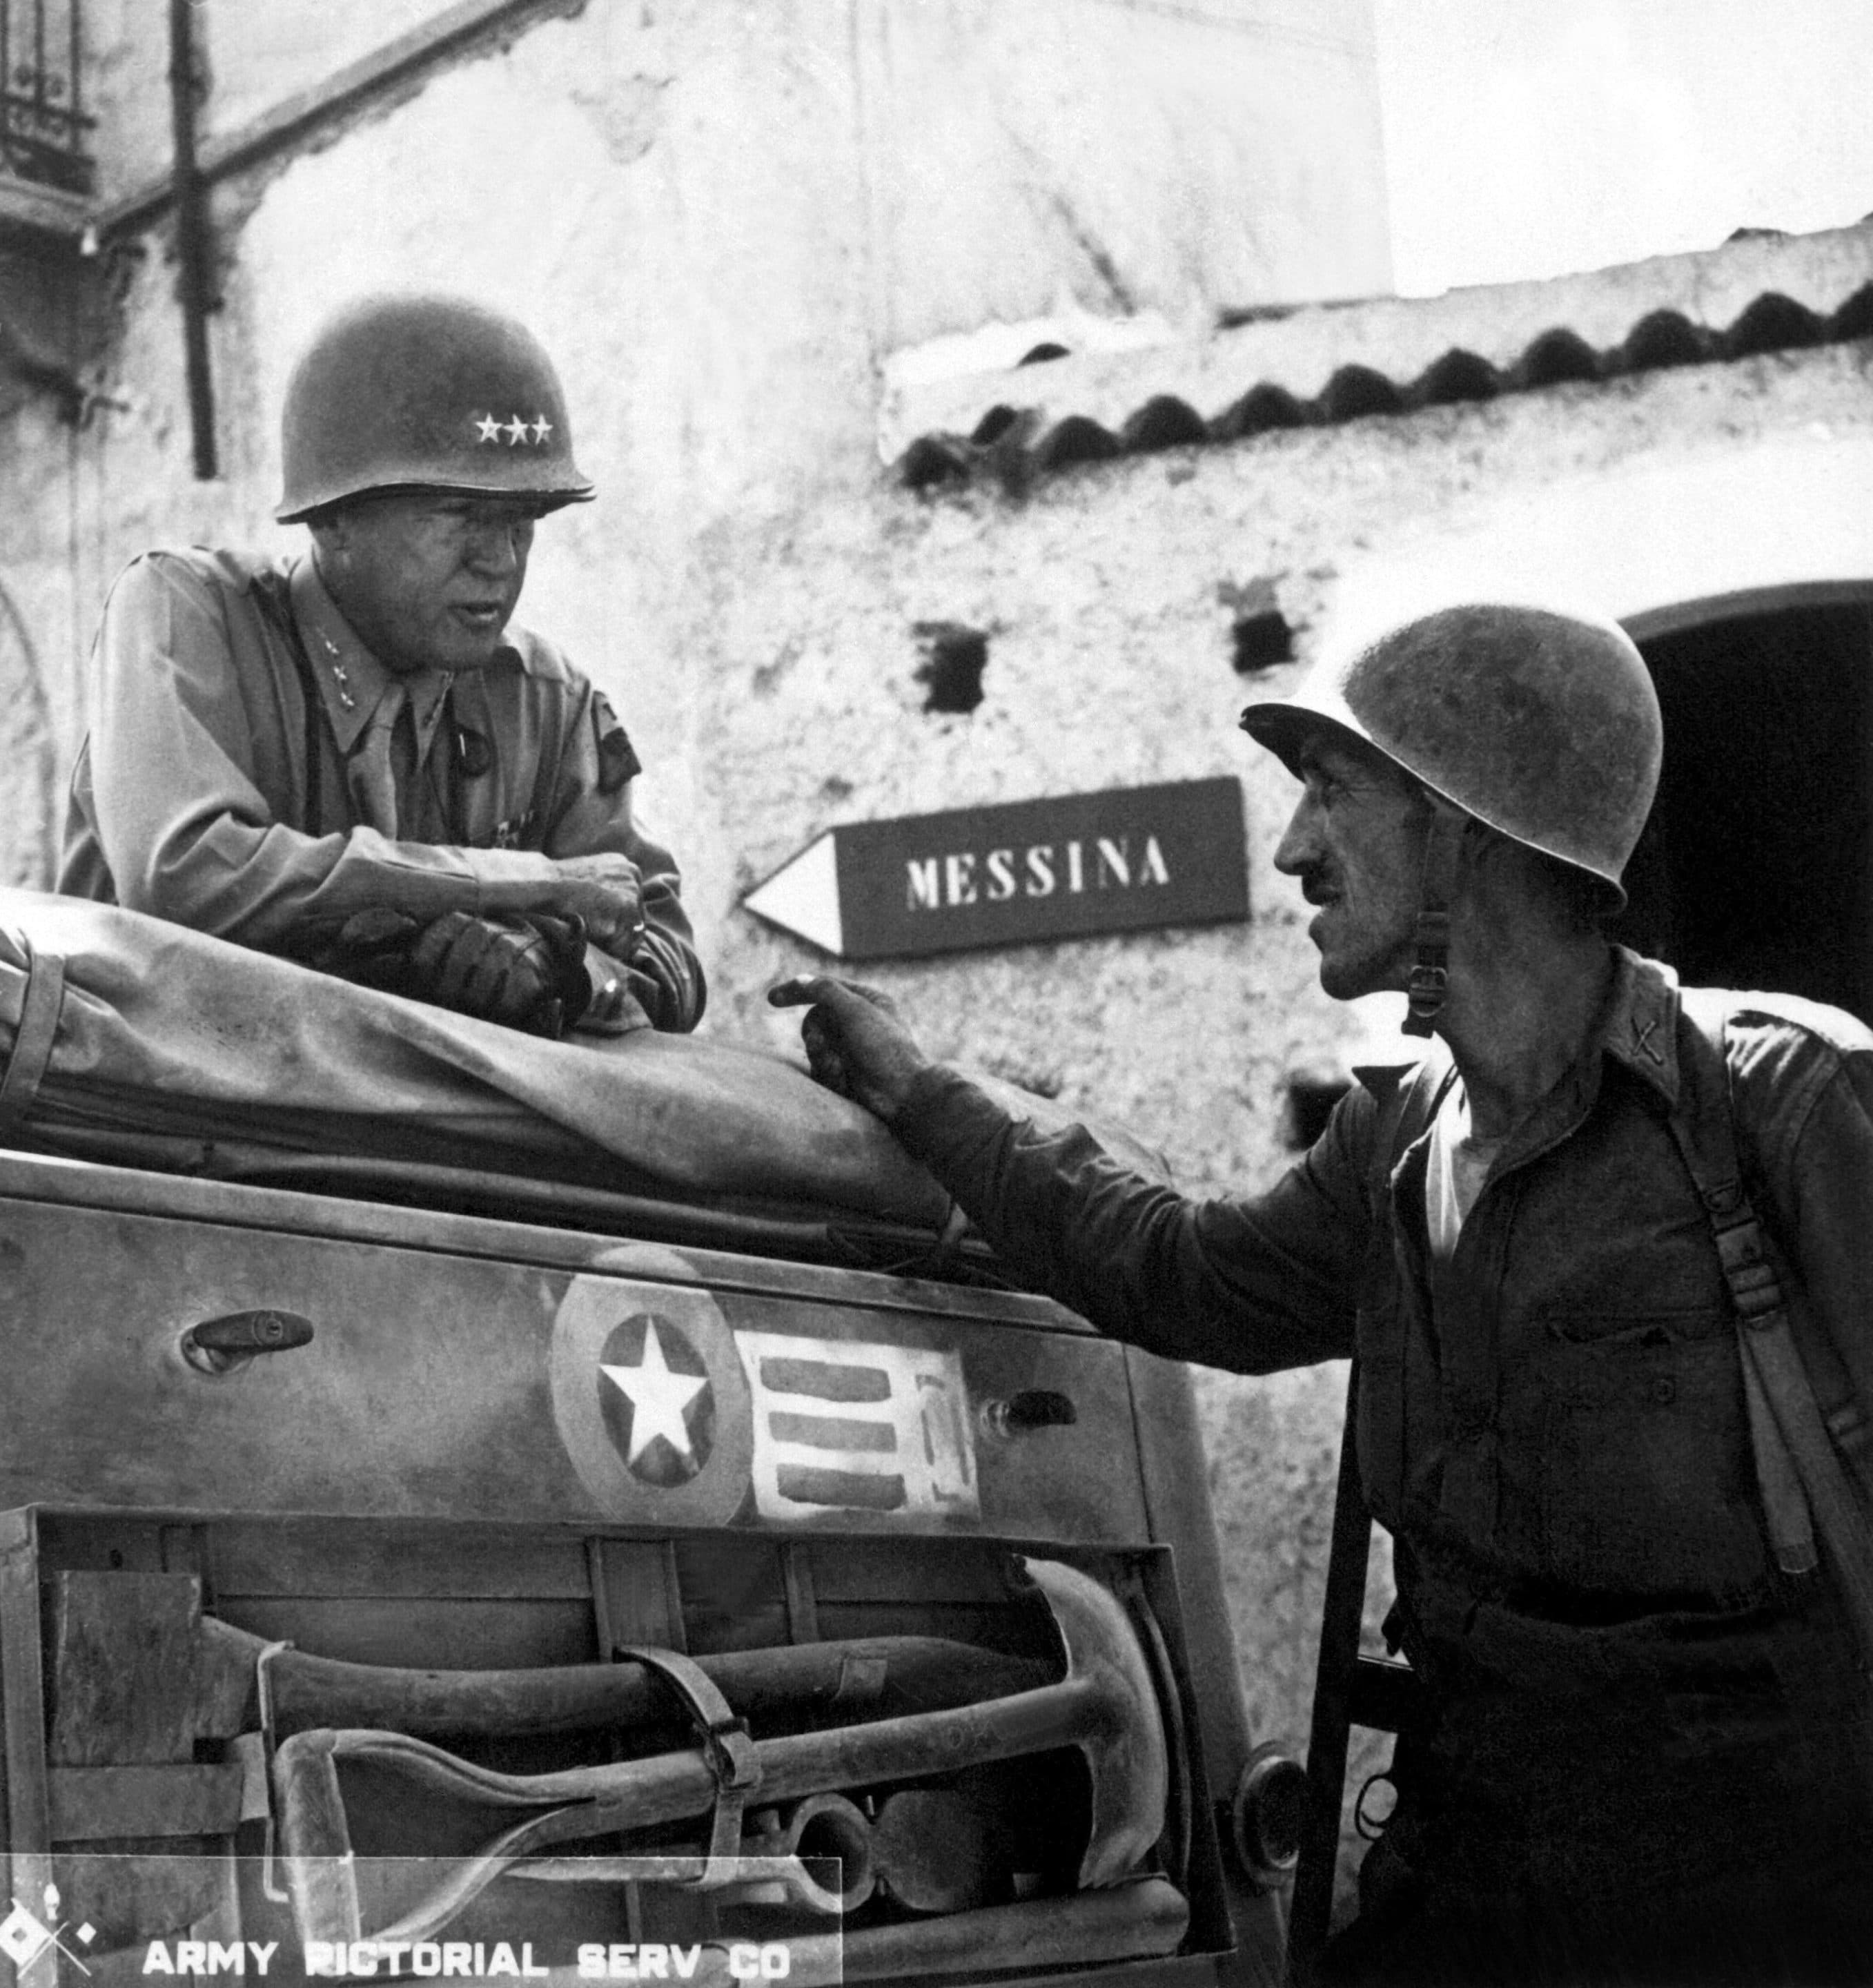 Lt. Col. Lyle Bernard, CO, 30th Inf. Regt., a prominent figure in the second daring amphibious landing behind enemy lines on Sicily's north coast, discusses military strategy with Lt. Gen. George S. Patton.  Near Brolo.  1943.   (Army)
Exact Date Shot Unknown
NARA FILE #:  111-SC-246532
WAR & CONFLICT BOOK #:  1024 Crédits : wikicommons